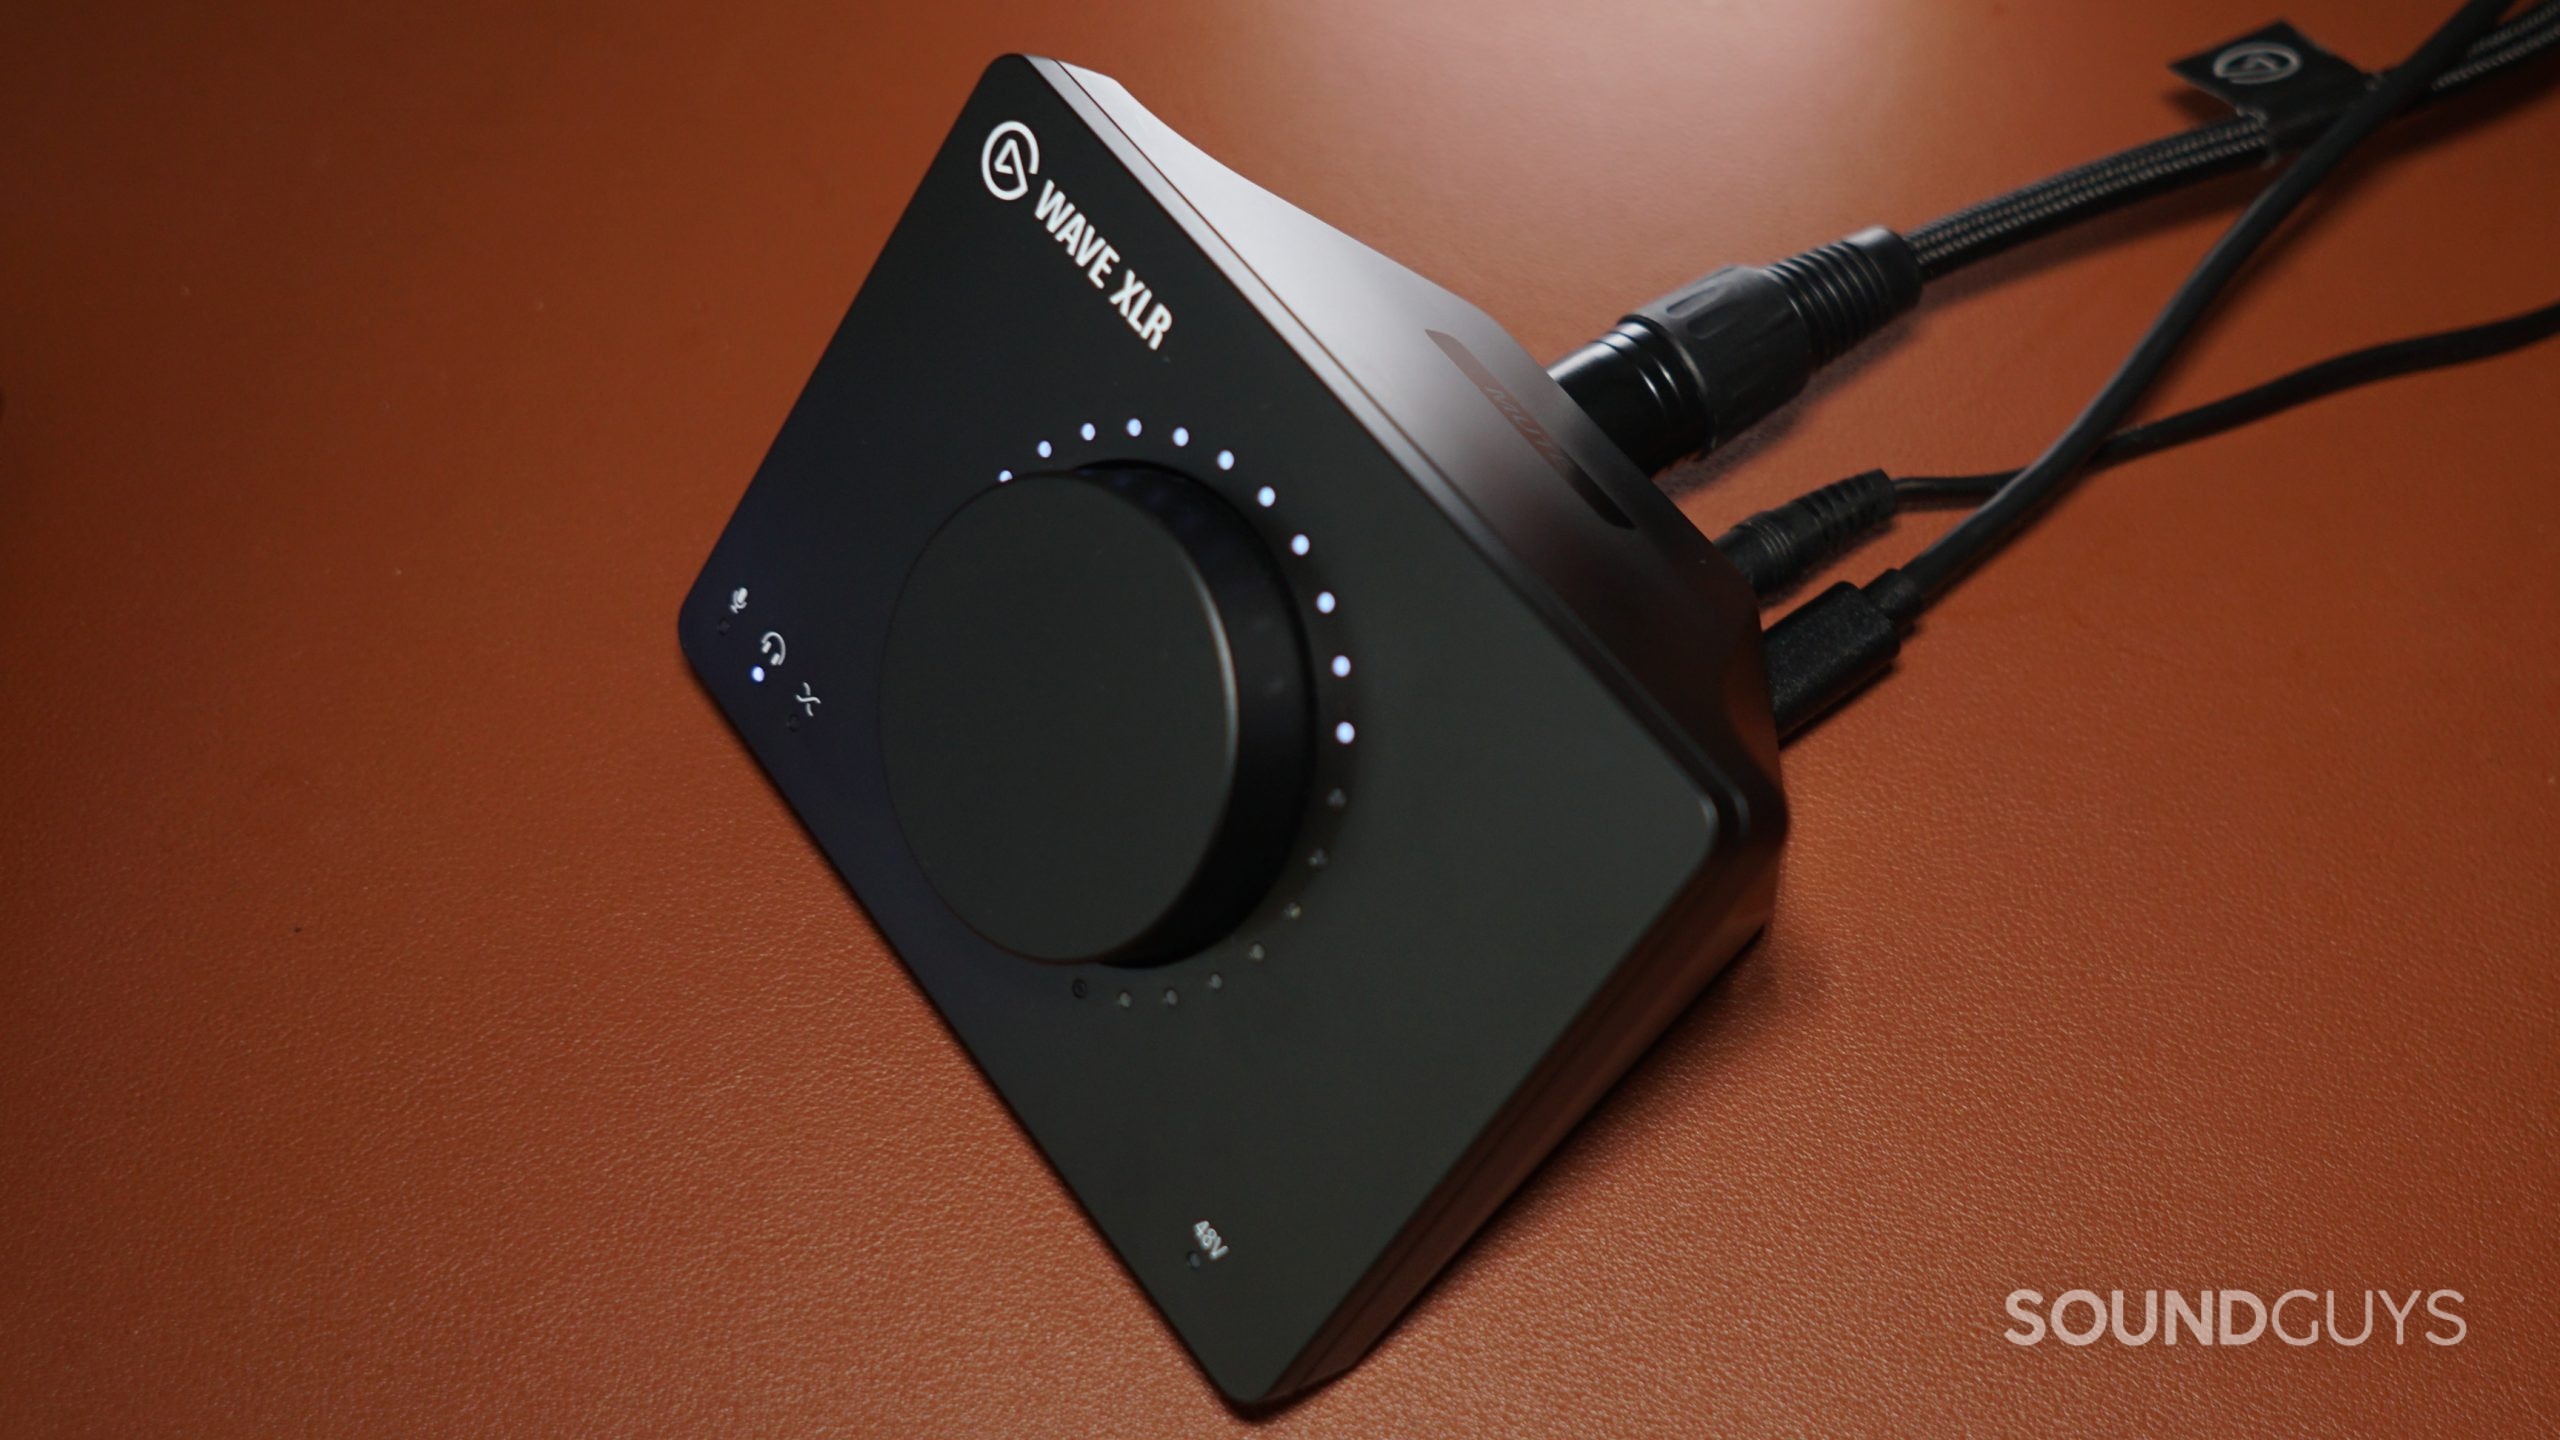 The Elgato Wave XLR unit sits on a leather surface, with cords plugged into its USB-C, XLR, and 3.5mm ports